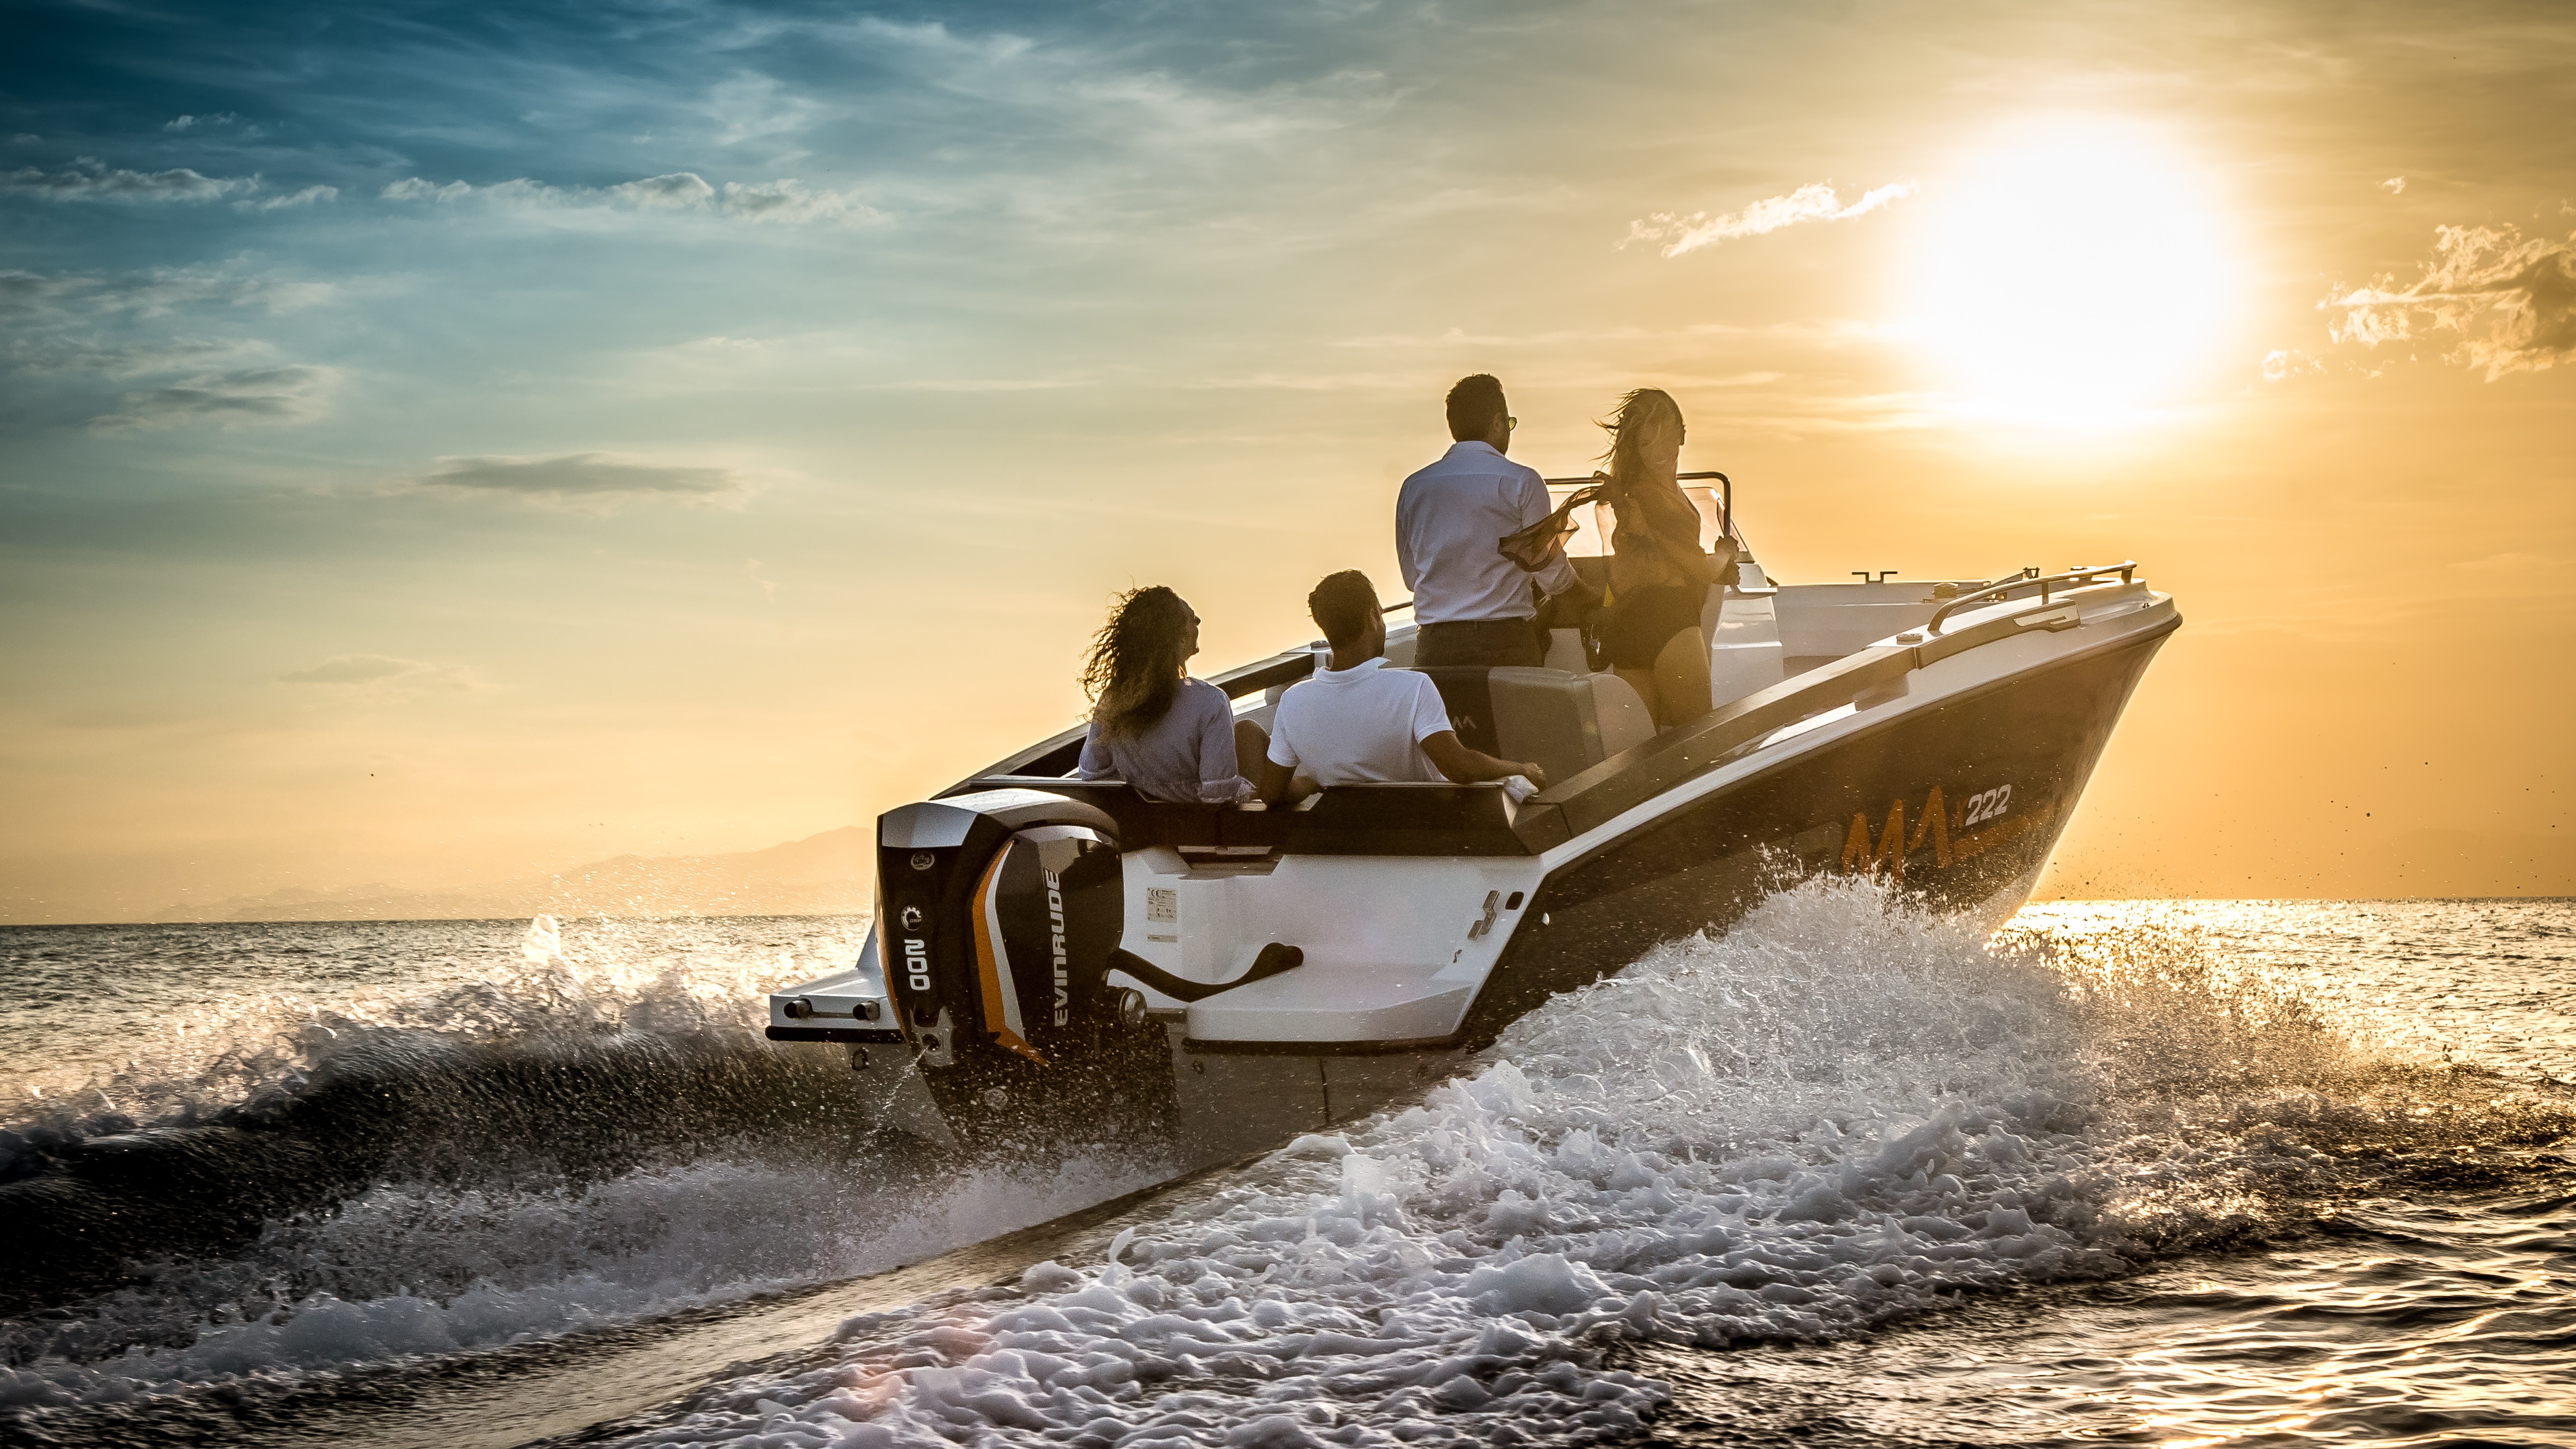 Four people on a boat yielding an Evinrude motor driving towards the sunset